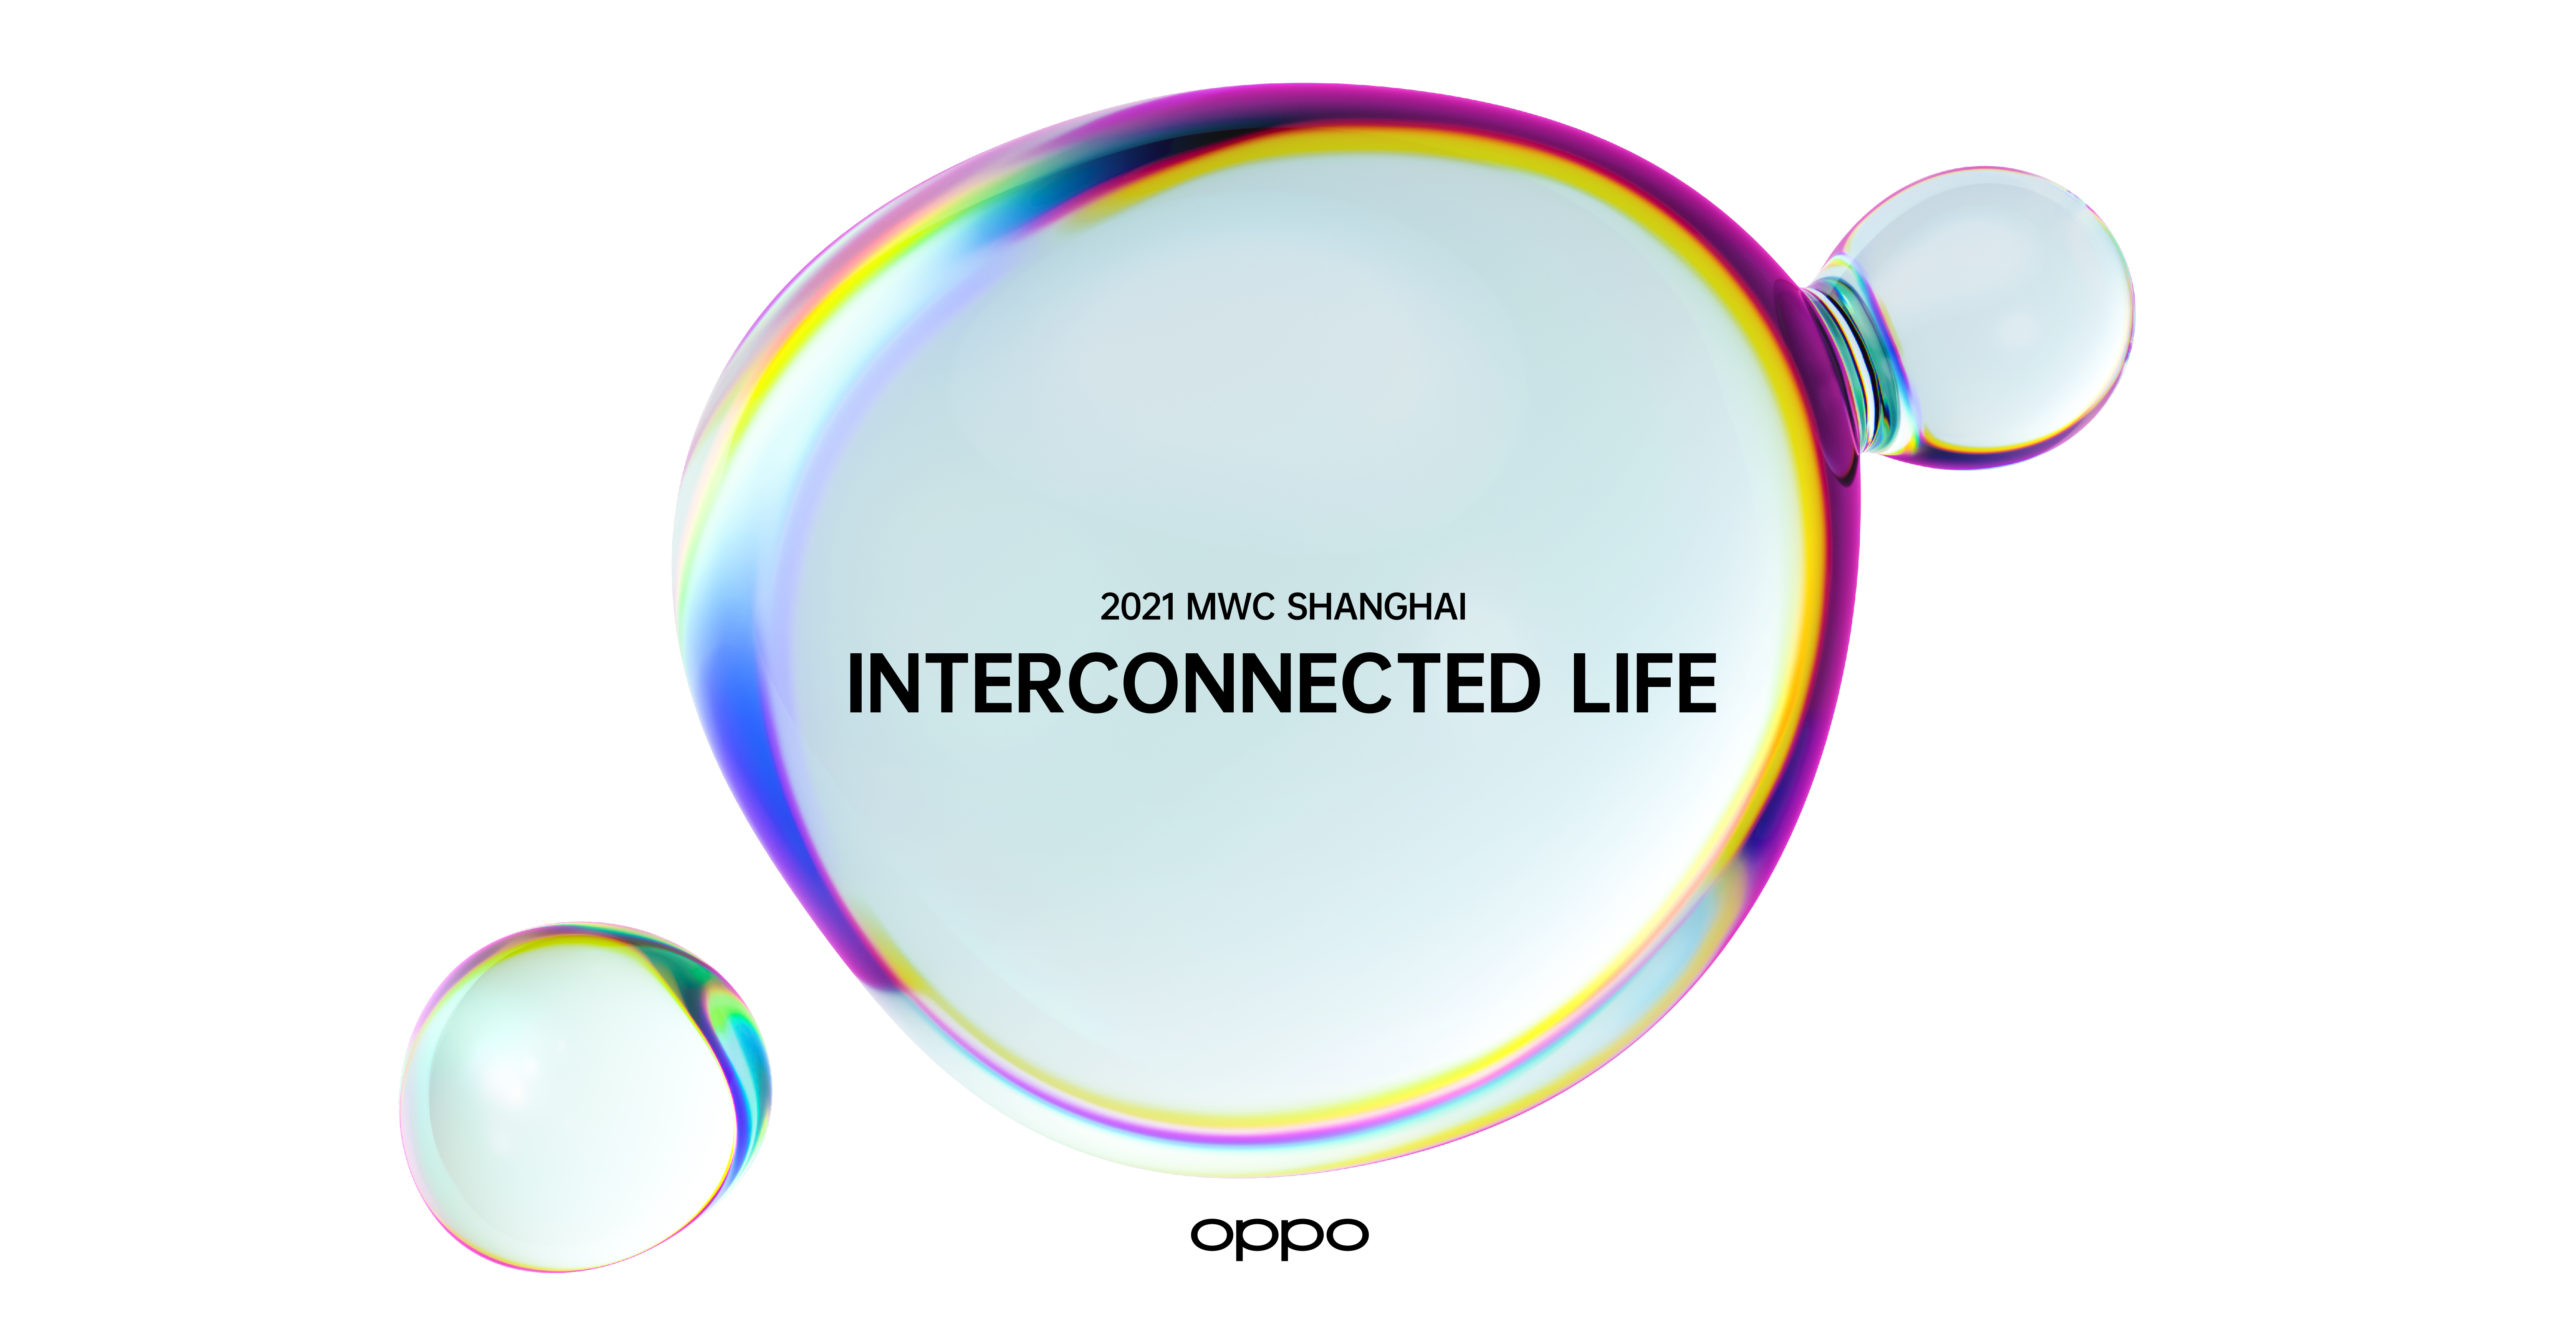 Image for OPPO To Showcase New Technology Breakthroughs And Partnerships At Mobile World Congress Shanghai 2021